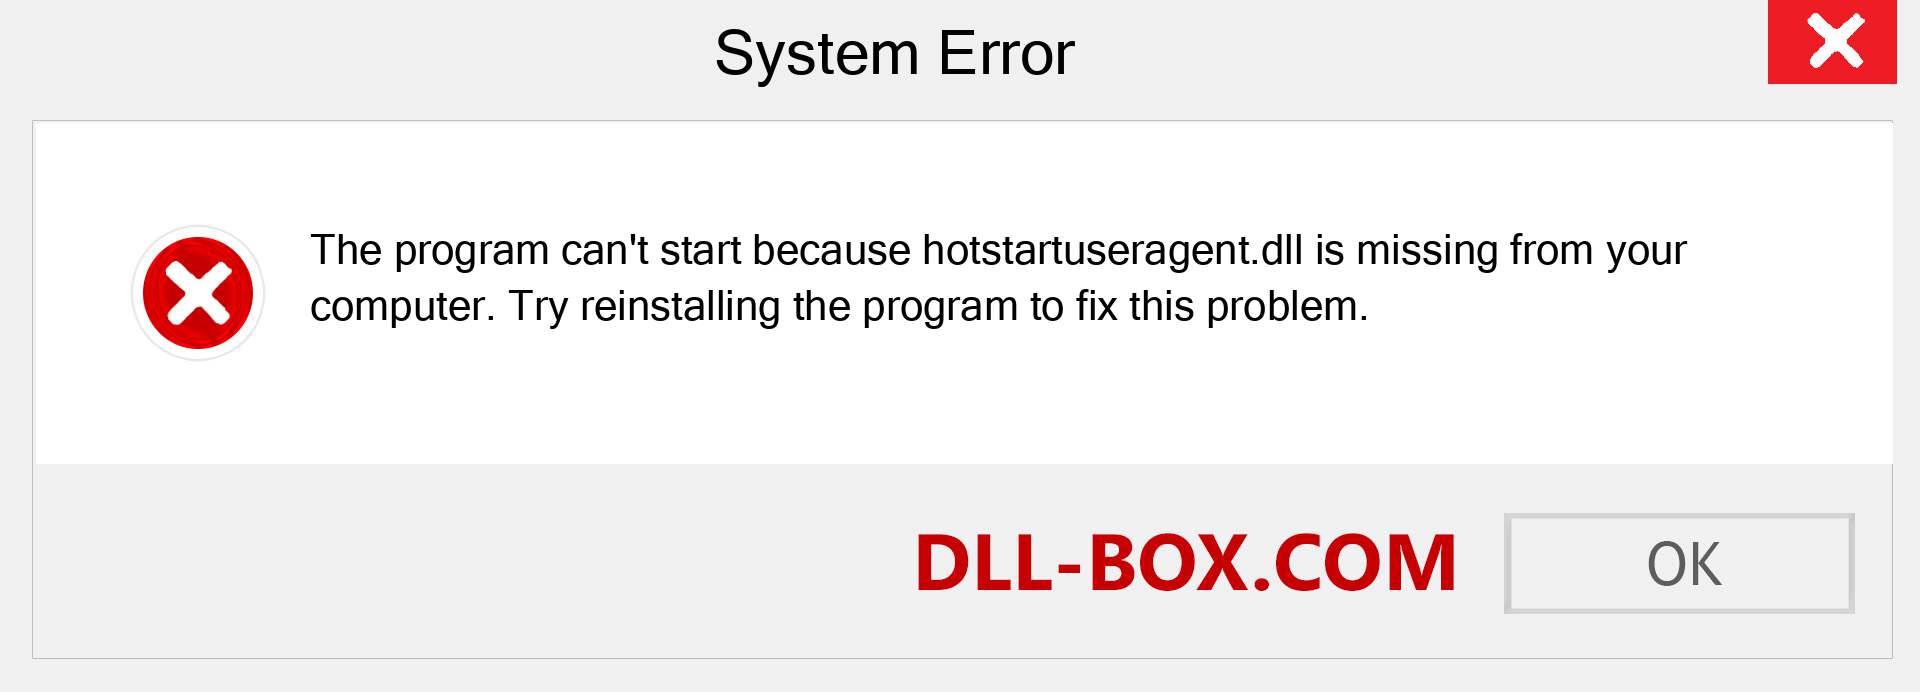  hotstartuseragent.dll file is missing?. Download for Windows 7, 8, 10 - Fix  hotstartuseragent dll Missing Error on Windows, photos, images